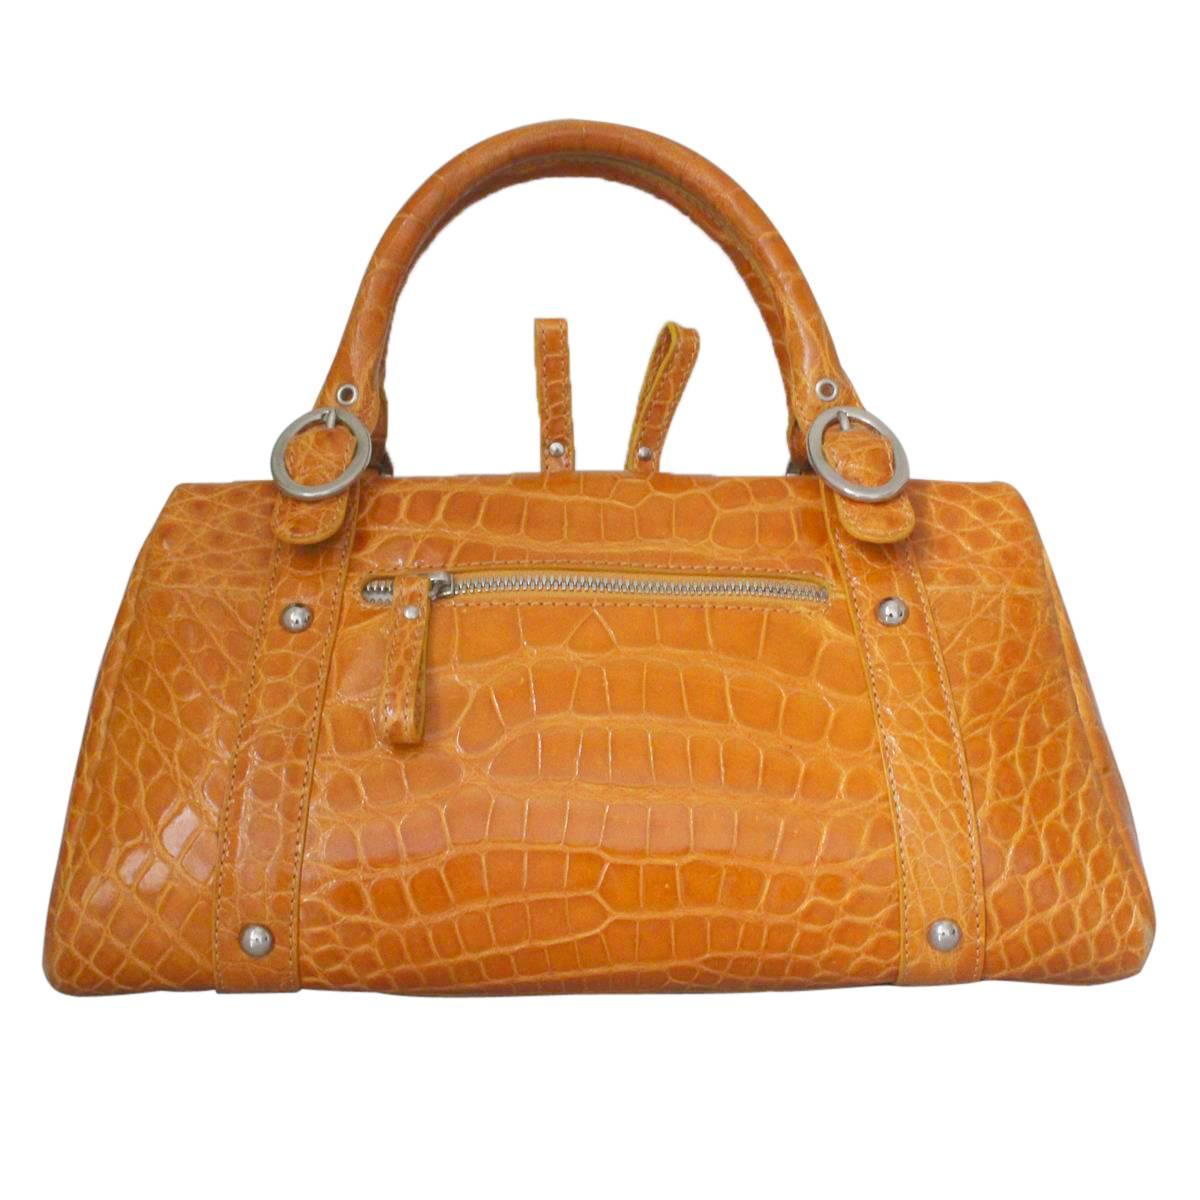 Stunning and amazing Colombo Via della Spiga Milano bag
Real crocodile
Ochre color bordering into orange
Two handles
Zip closure
Two external pockets with zip and phone holder
Buckskin internal
Three internal pockets (one with zip)
Cm 32 x